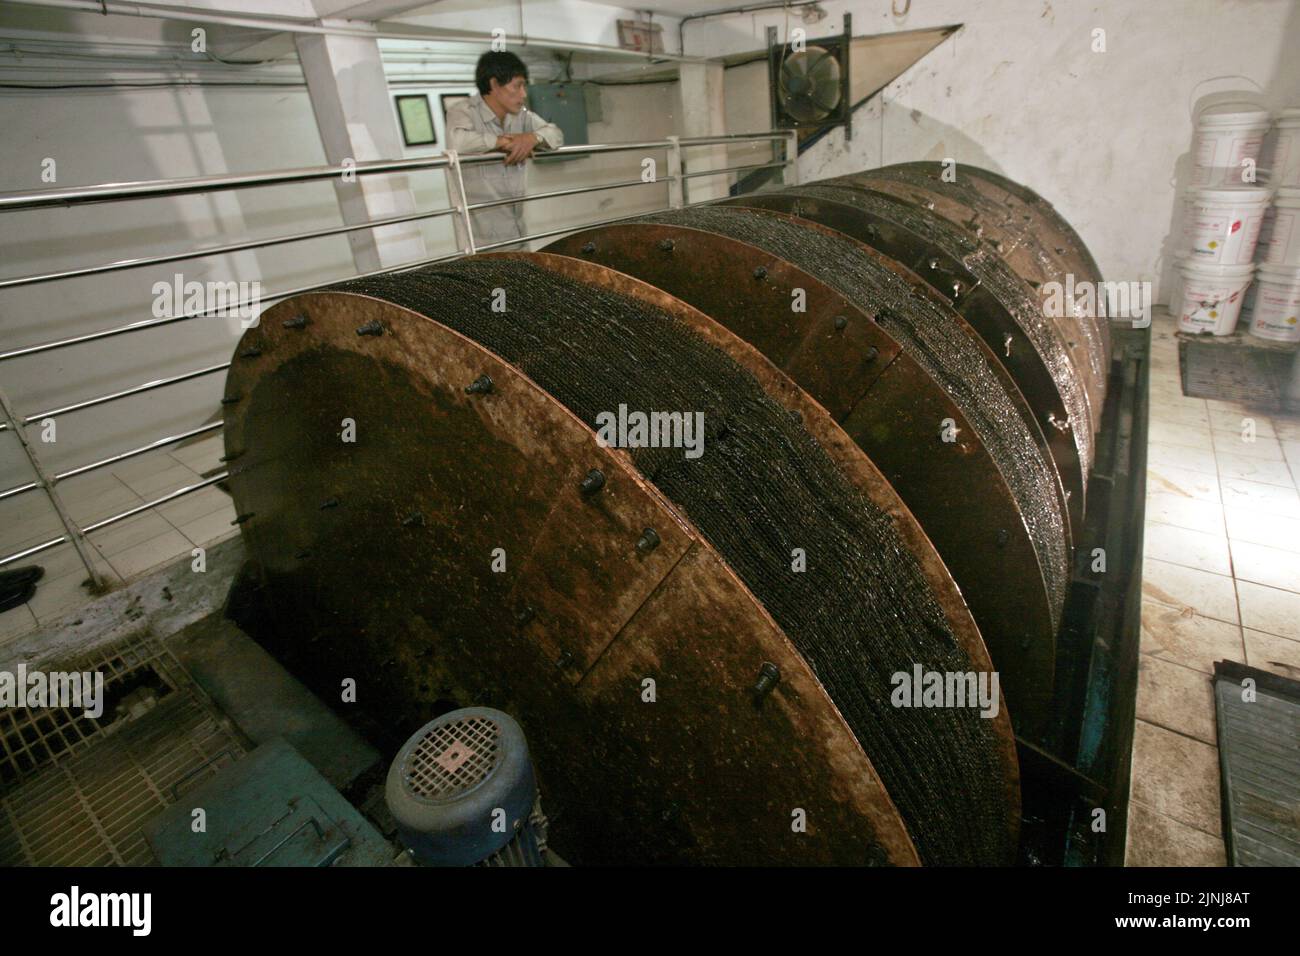 A worker is photographed as he is standing behind an installation of wastewater recycling system at Kompas Gramedia building in Kebon Jeruk, West Jakarta, Jakarta, Indonesia. Stock Photo